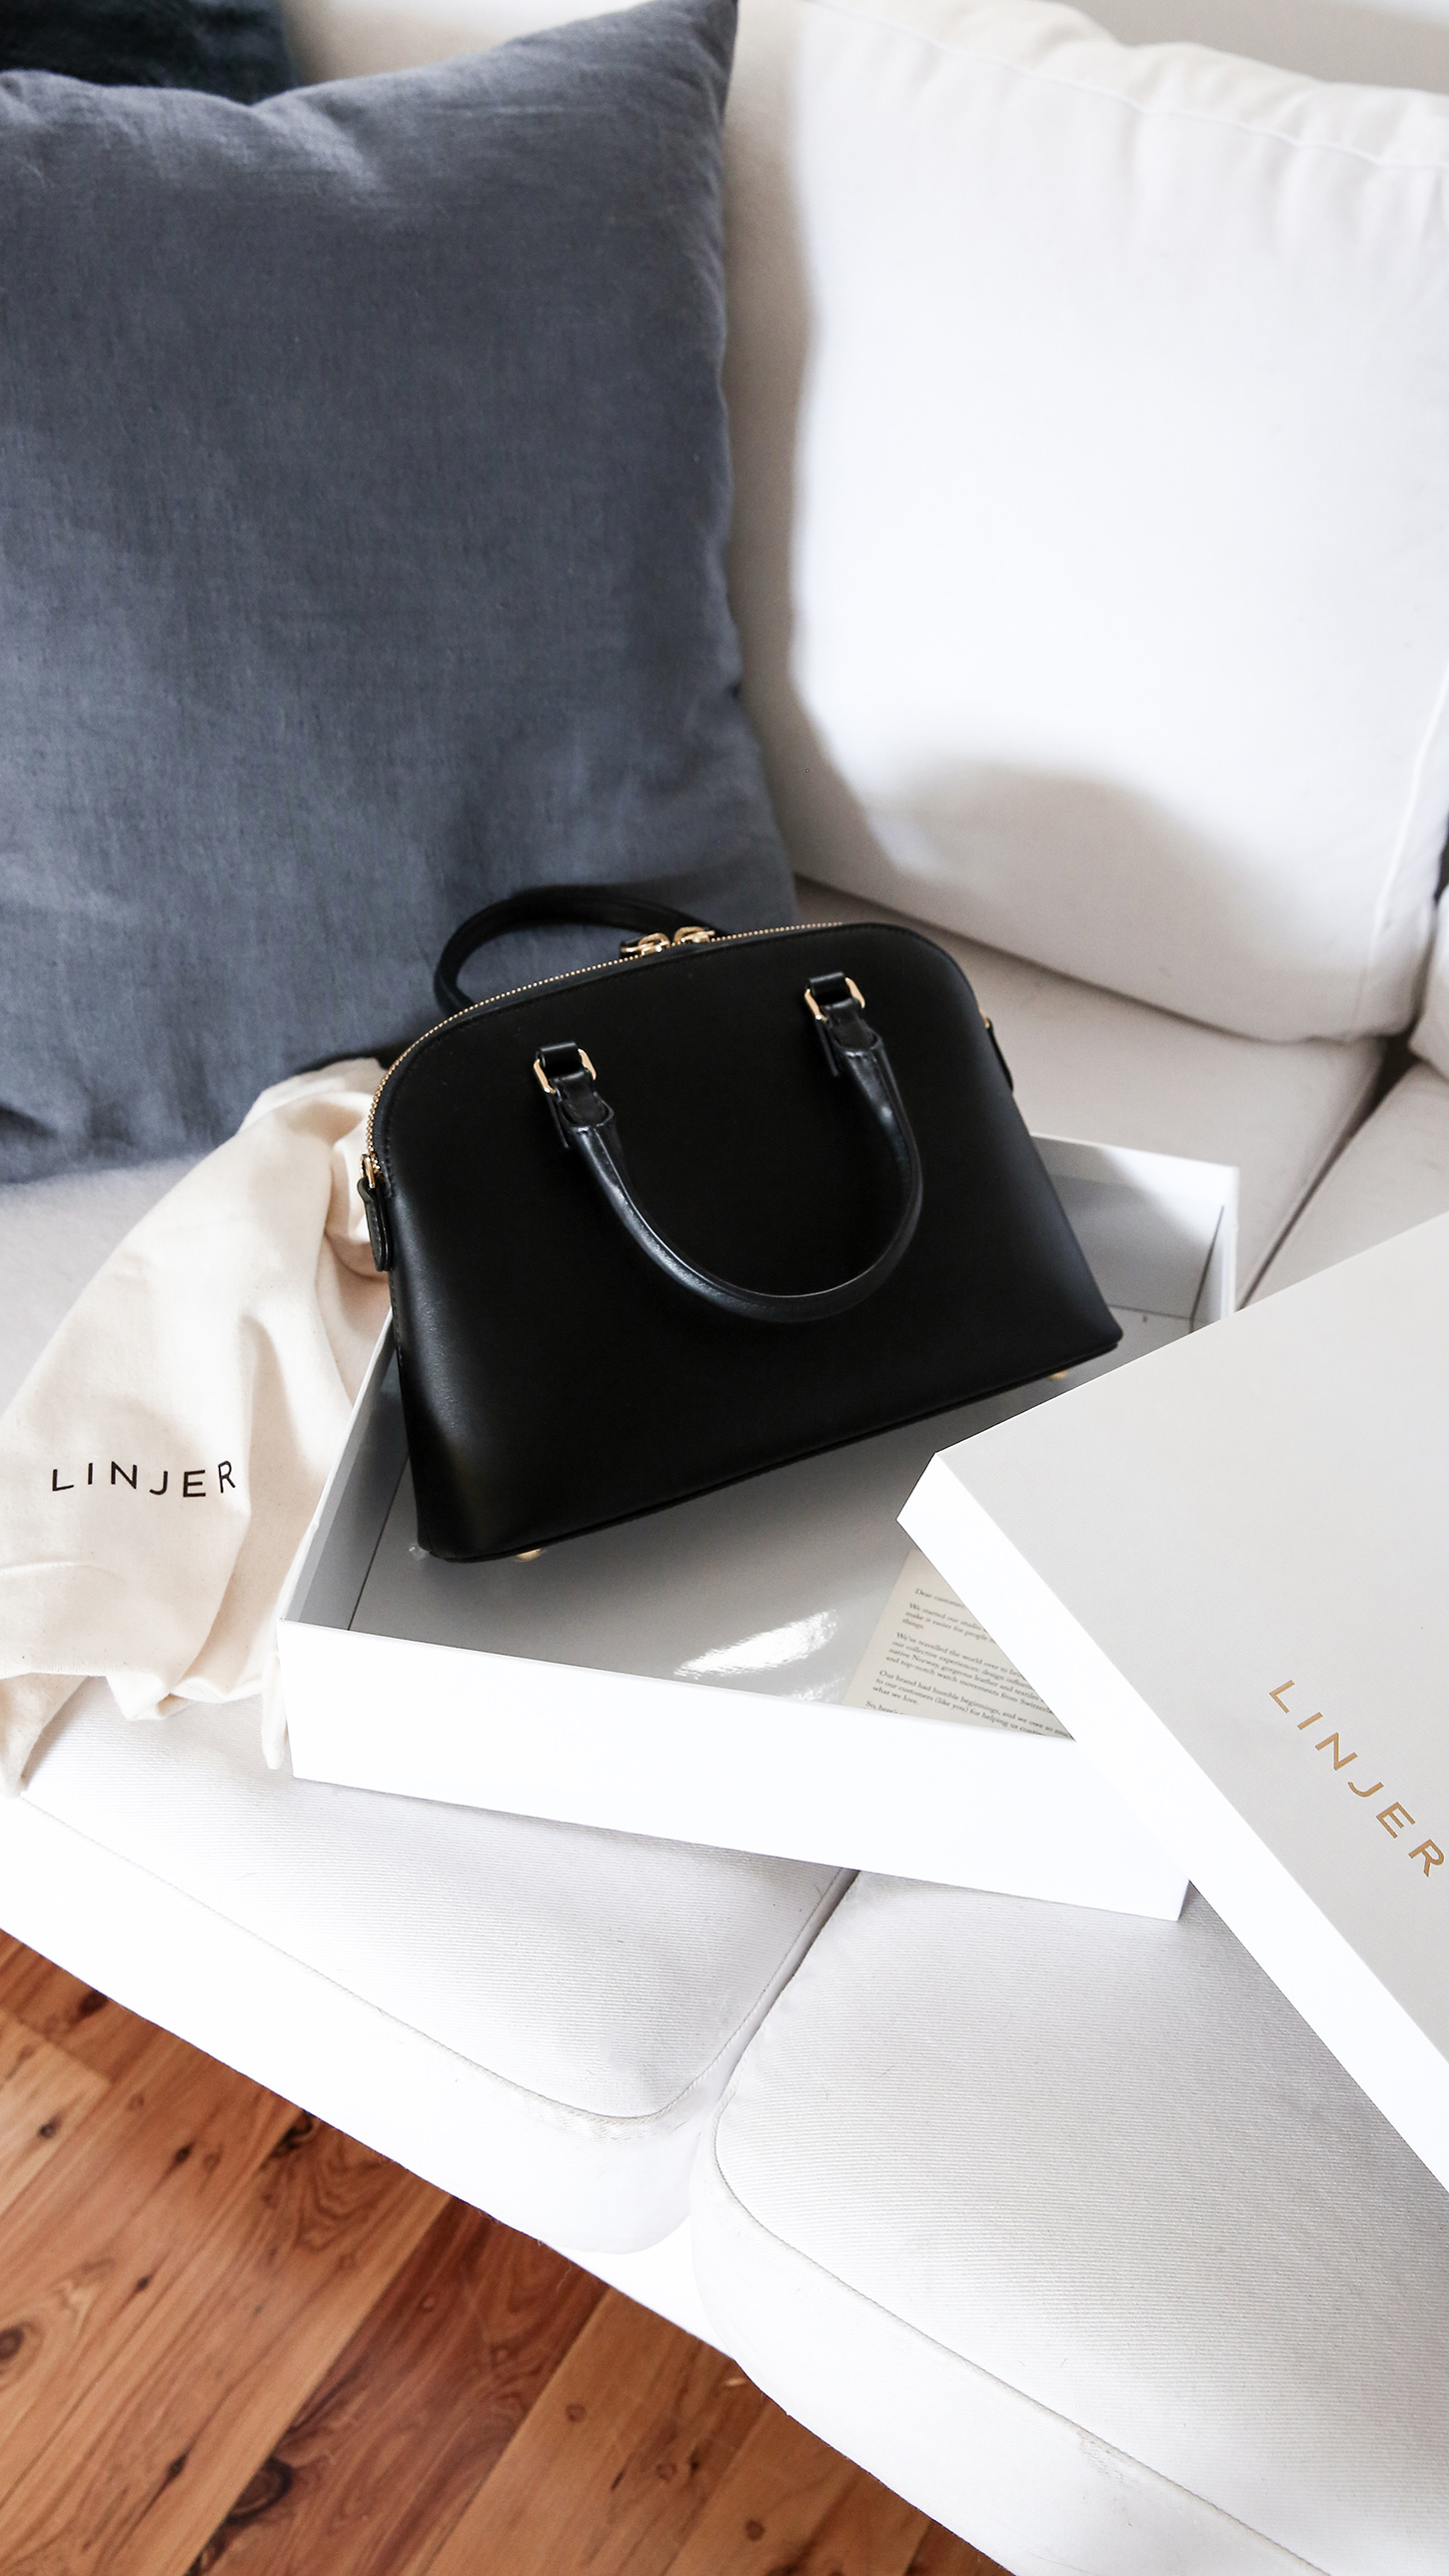 Linjer Crossbody Purse Review and What Fits Inside